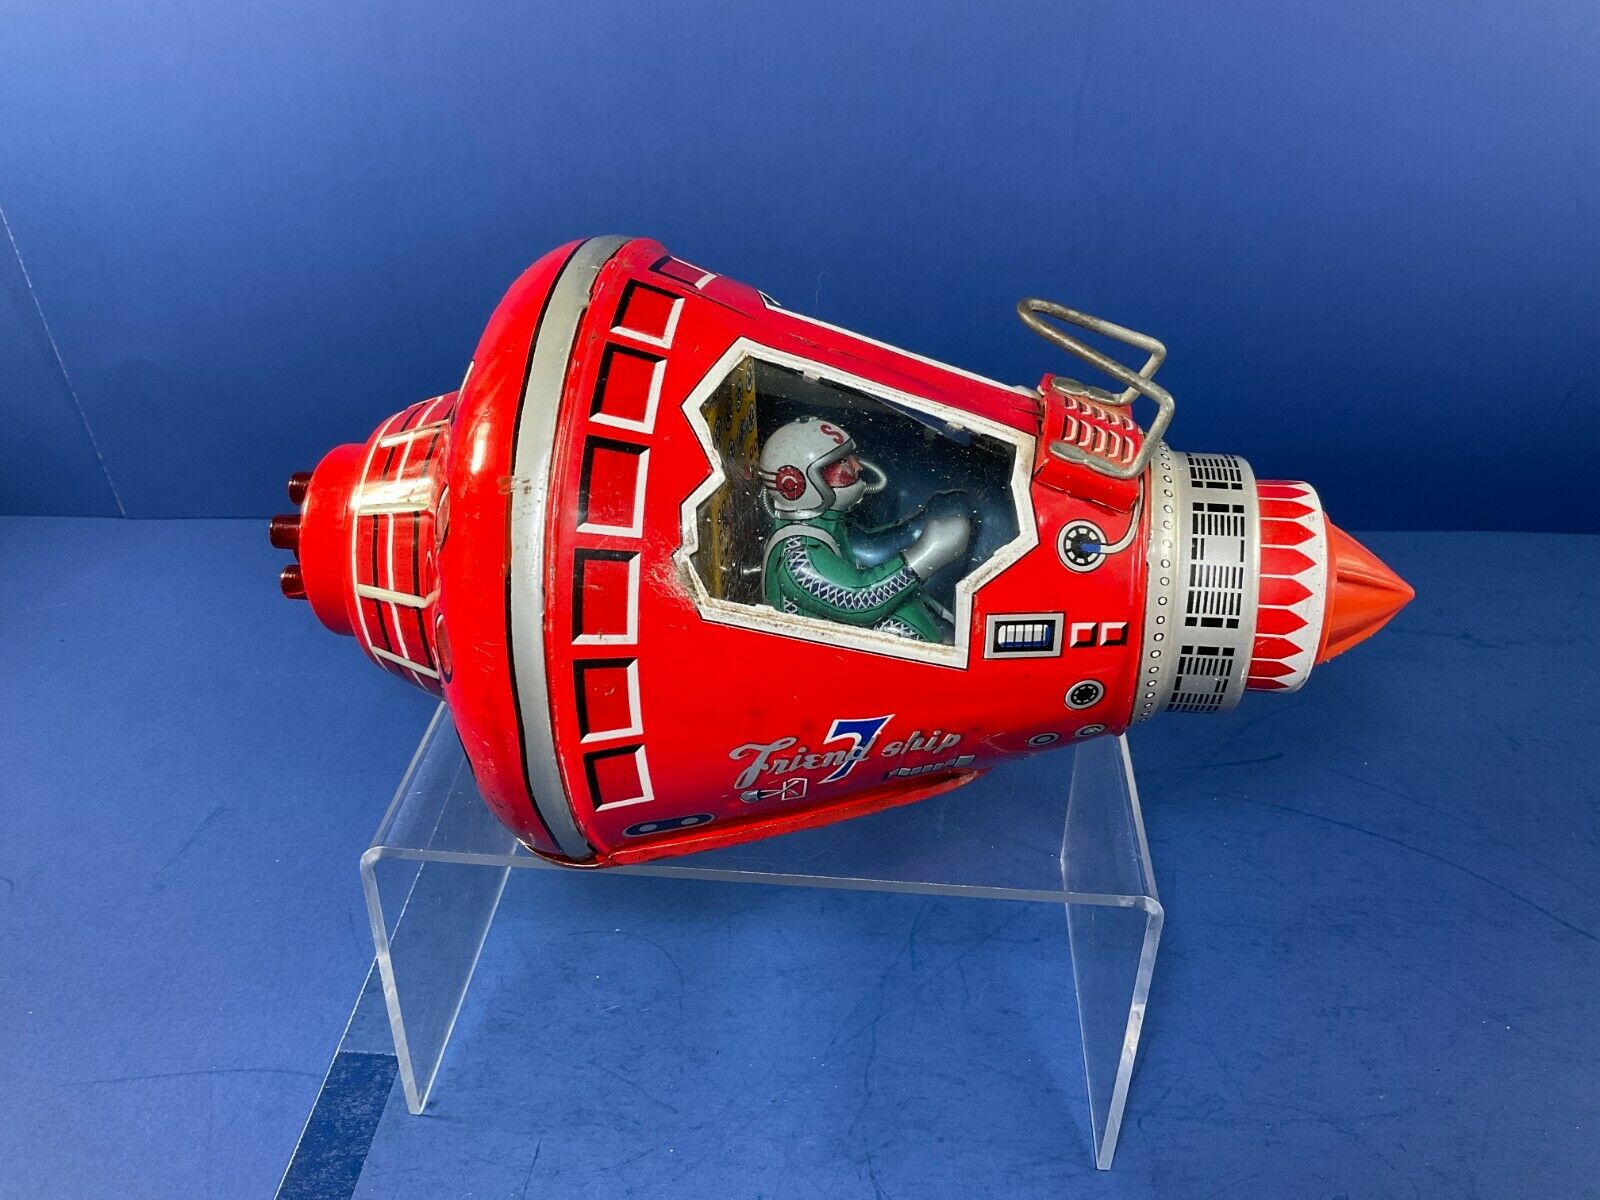 Rare, Red Capsule Friend Ship 7 Tin Toy, Made By S.h. Horikawa, Japan,1960s